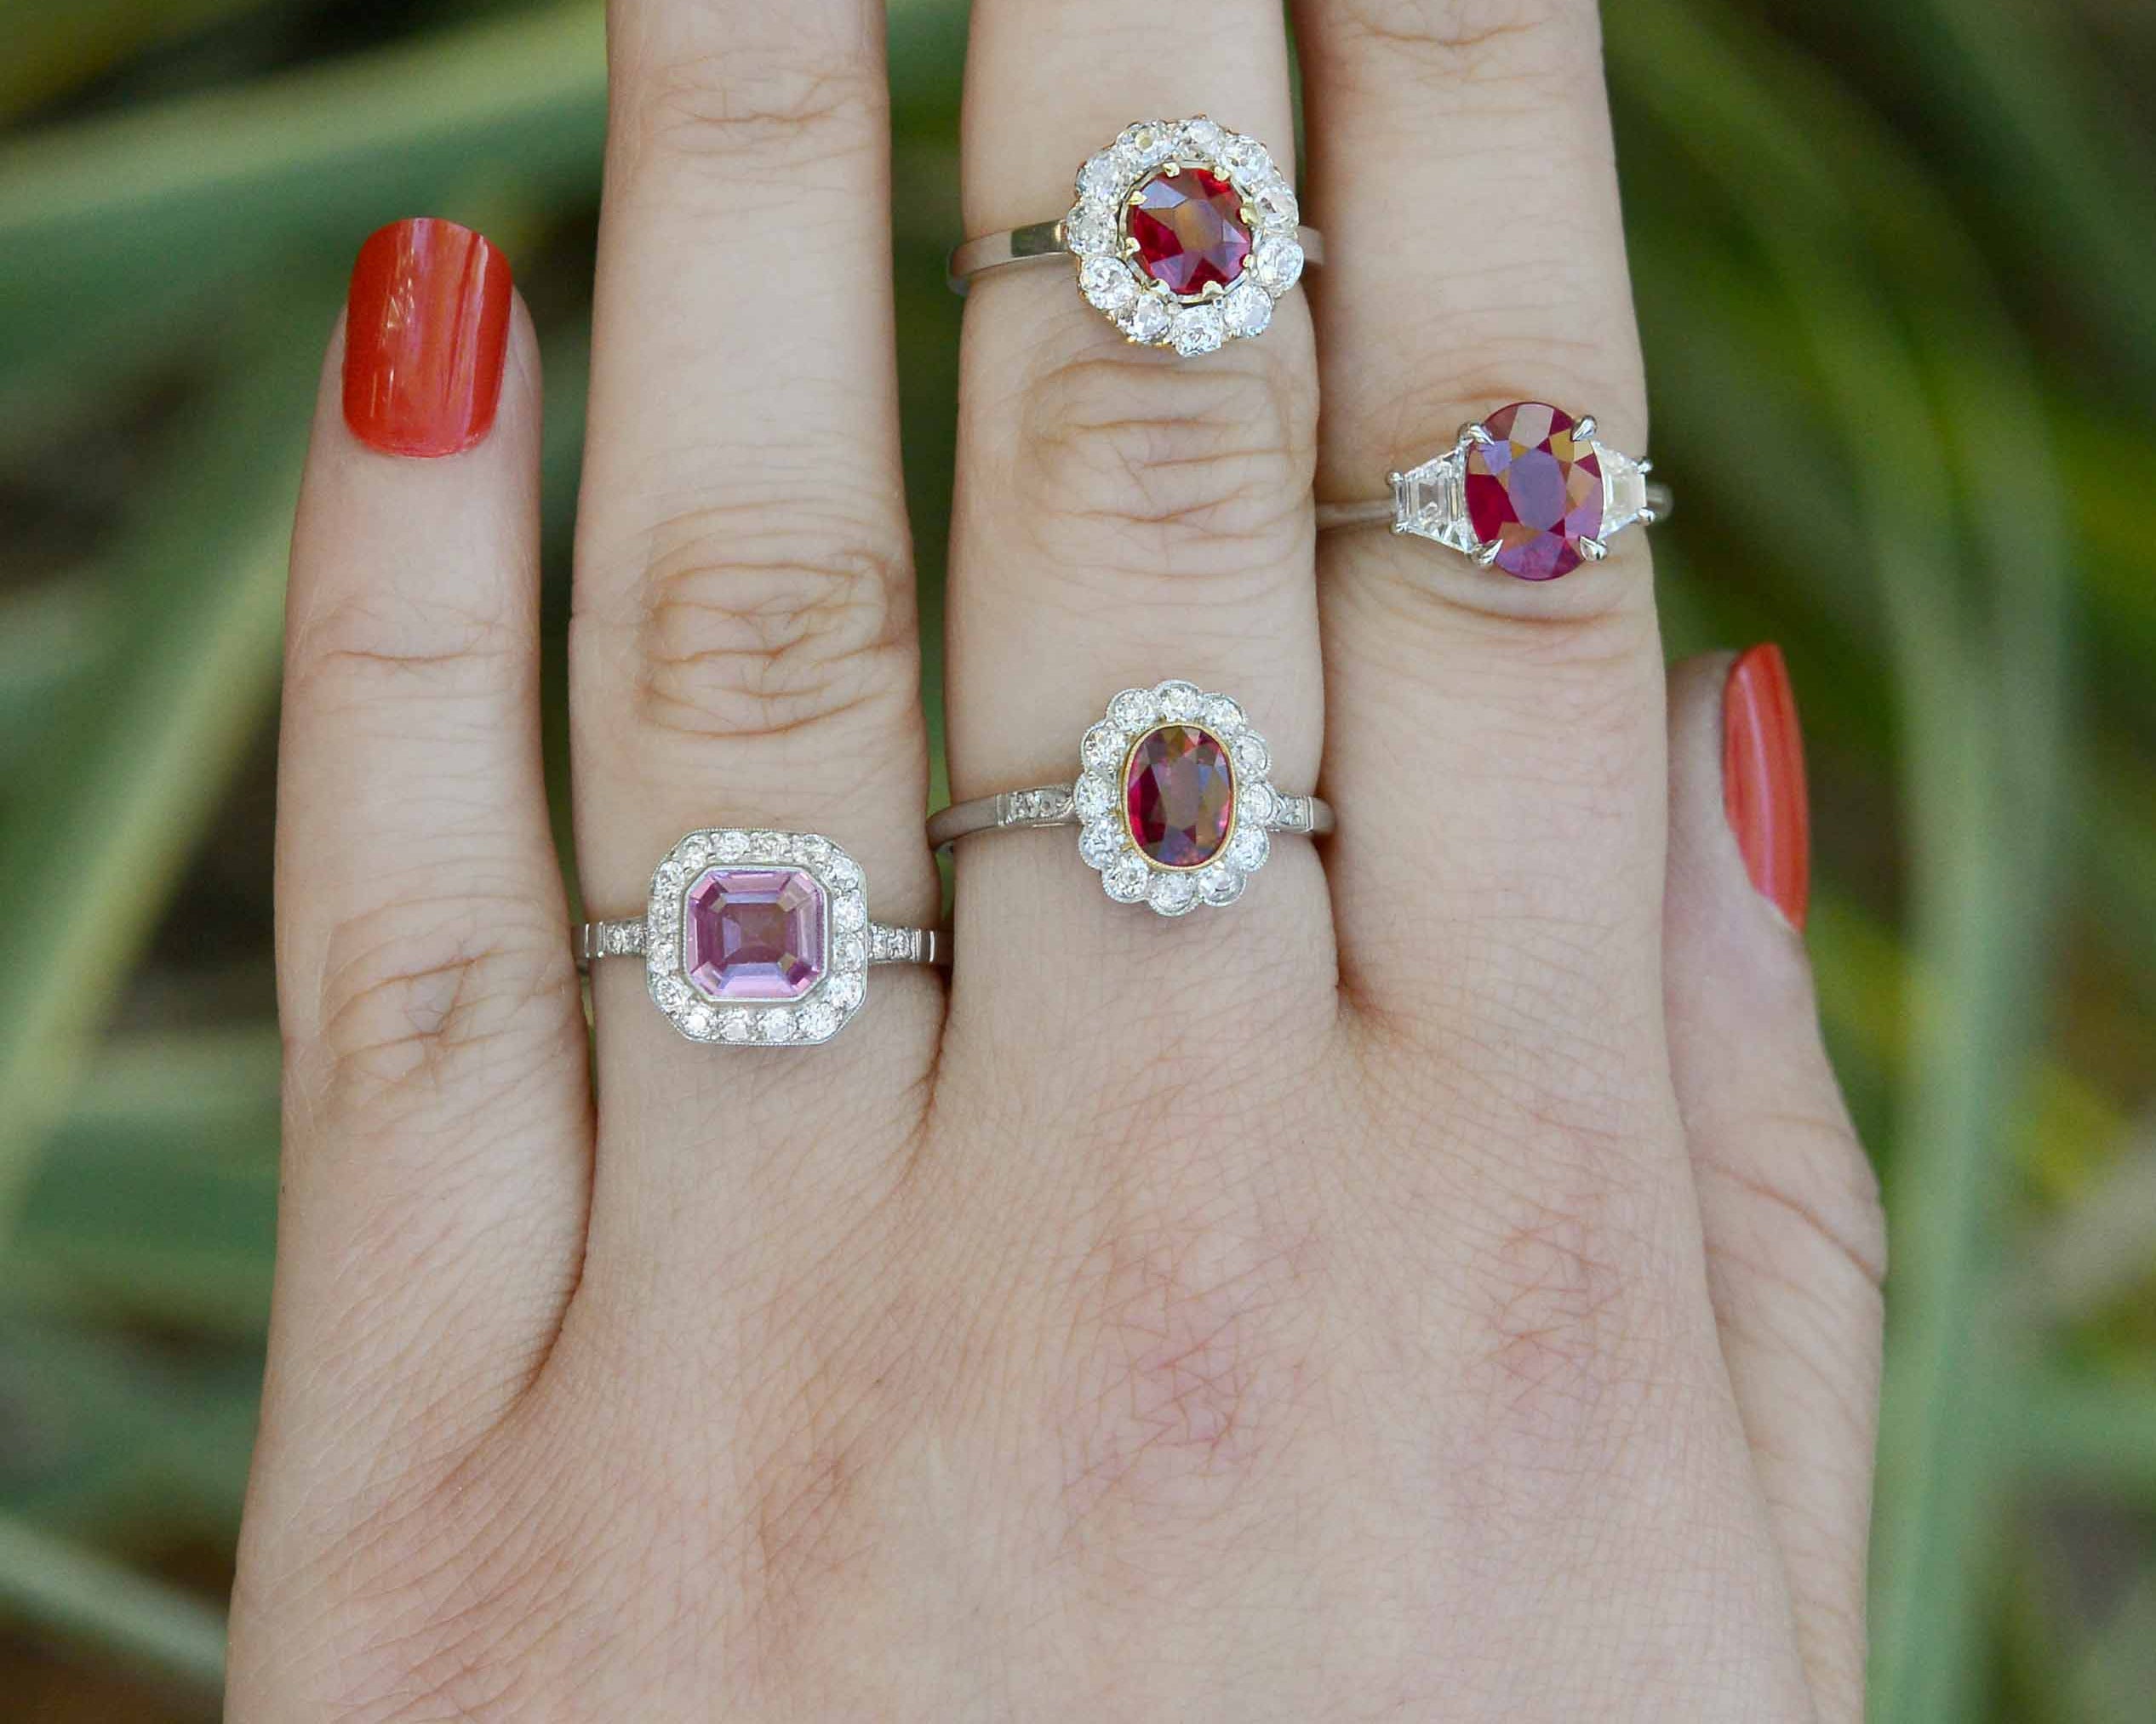 A few of our ruby and pink sapphire engagement rings.